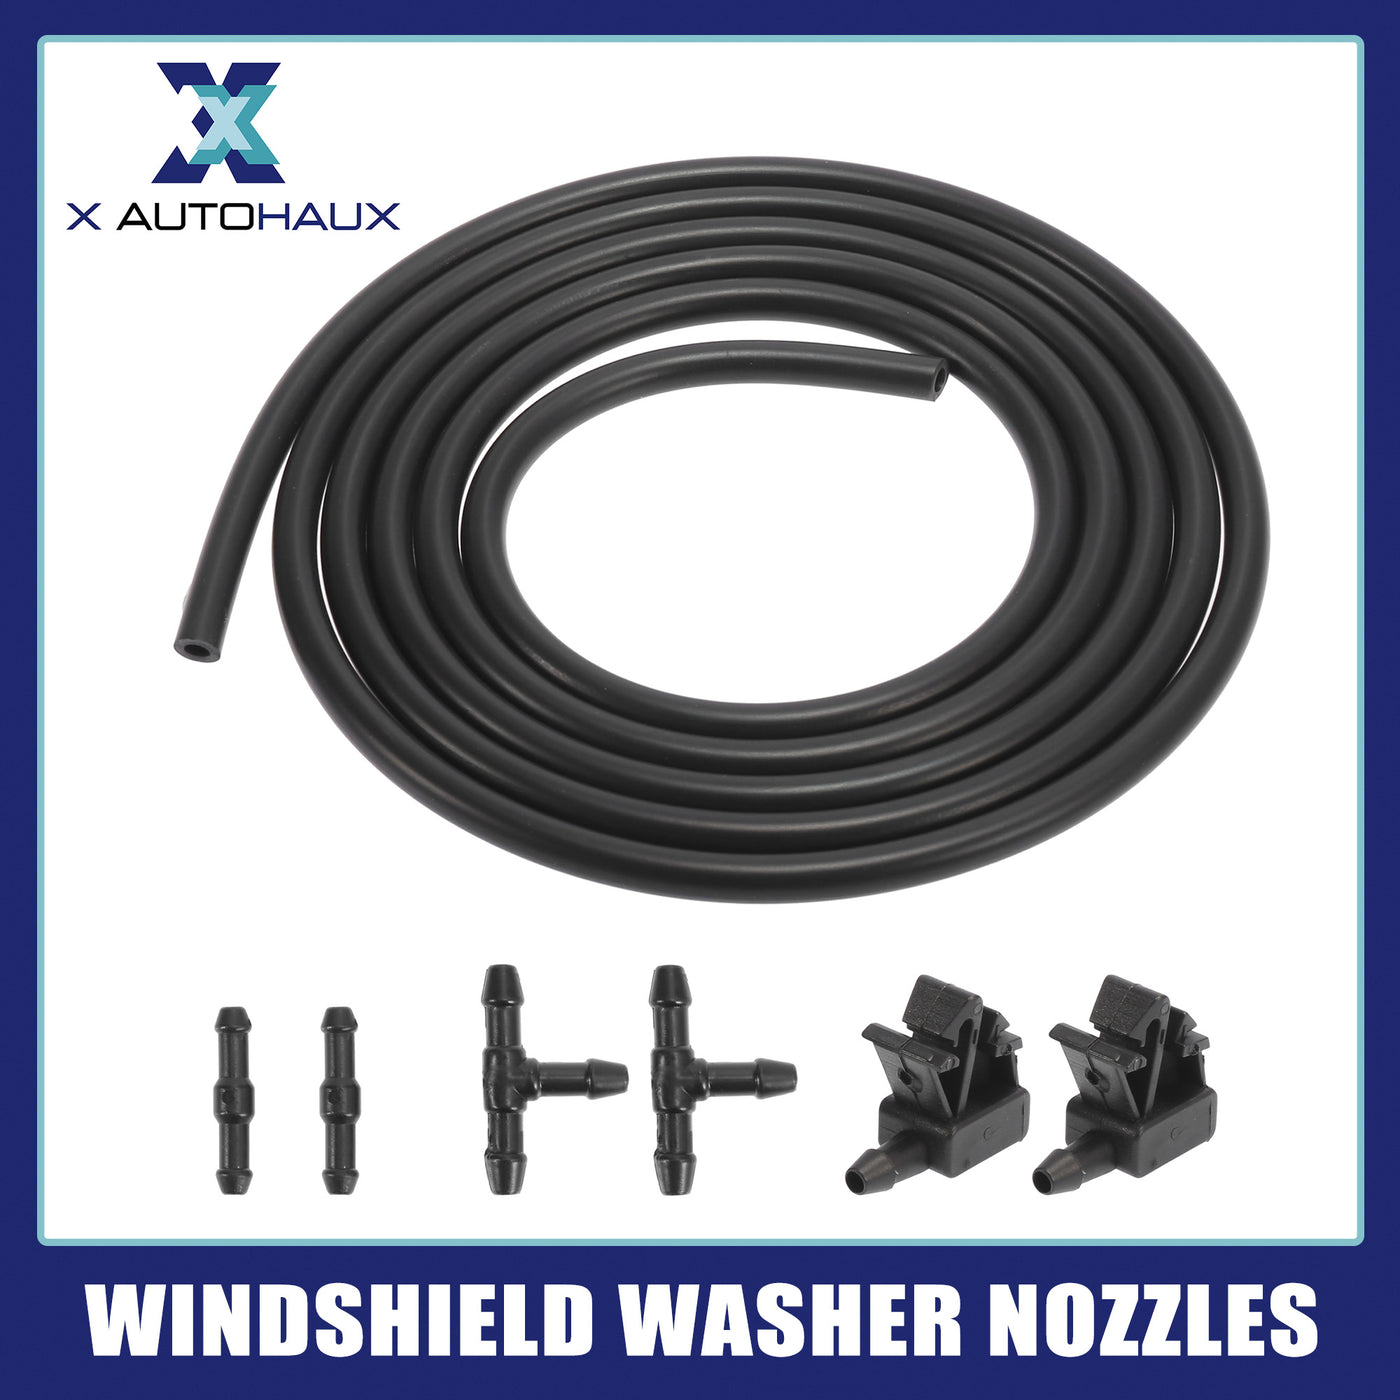 X AUTOHAUX 7pcs Front Windshield Washer Nozzles for Citroen Berlingo for MK2 2 Meters Windshield Washer Hose with 4pcs Connectors Replaces 6438Z7